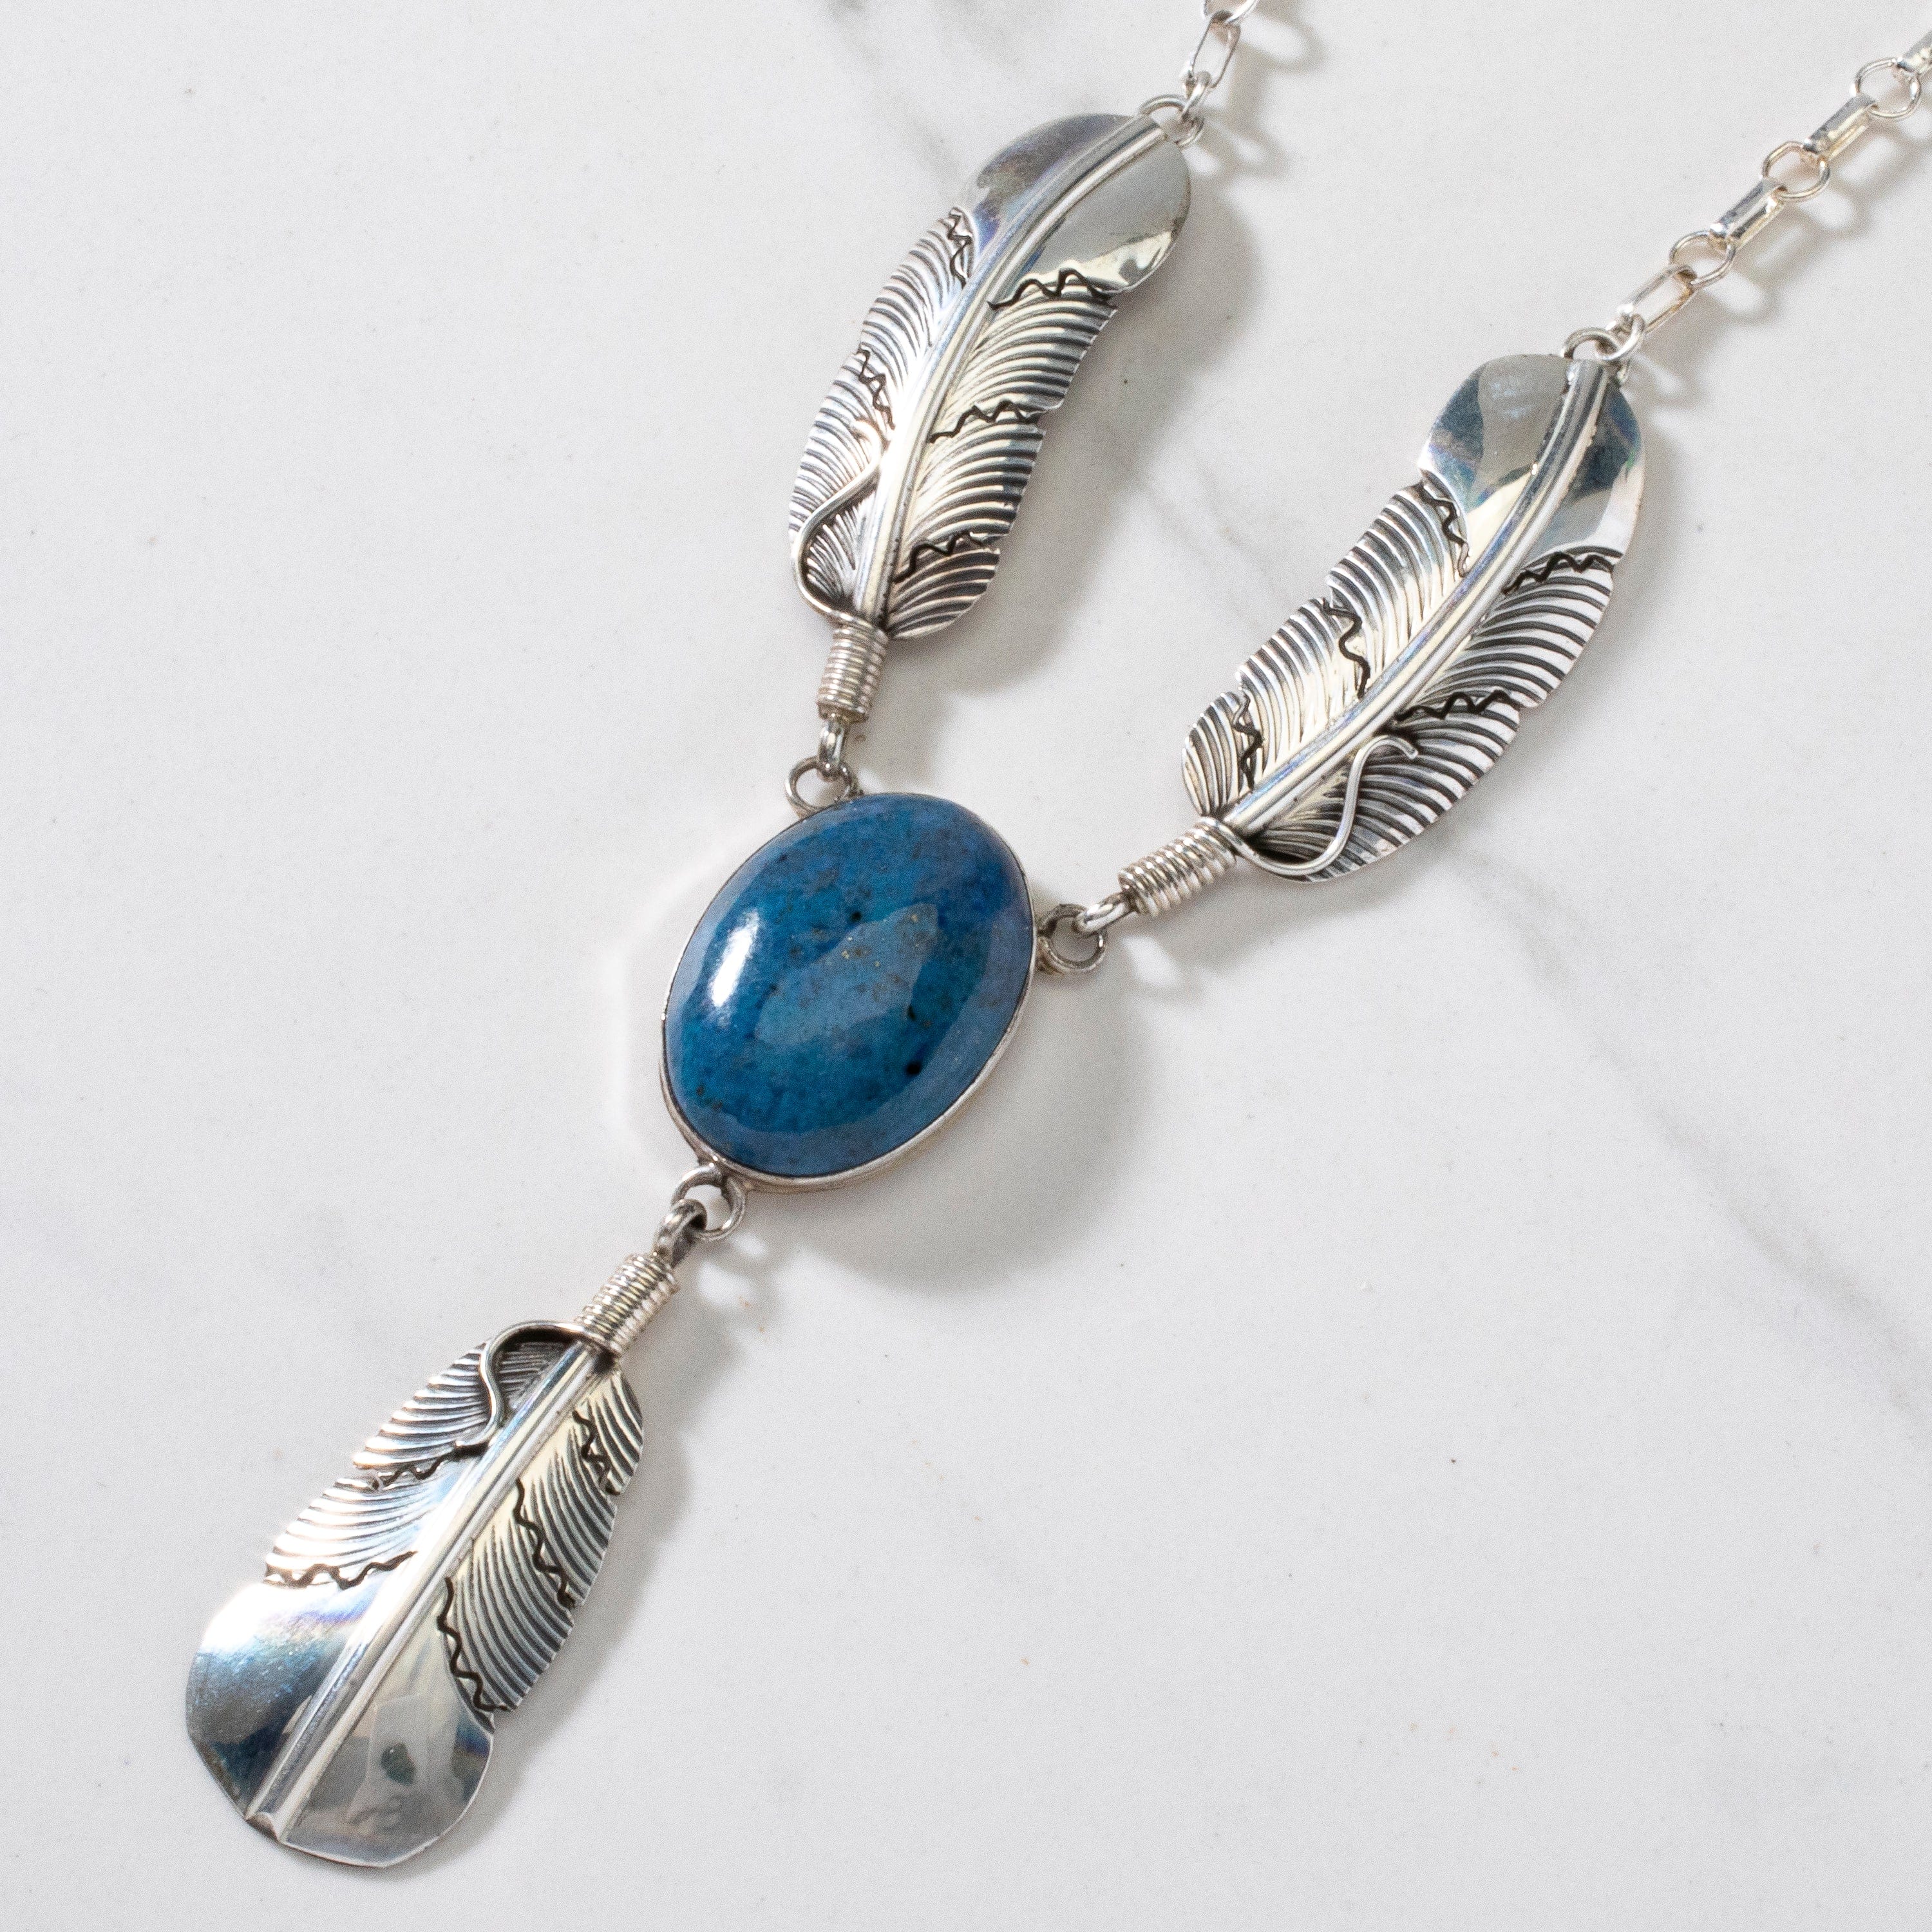 Kalifano Native American Jewelry 17.5" Richard Long Sr. Denim Lapis Feather USA Native American Made 925 Sterling Silver Necklace NAN1200.025